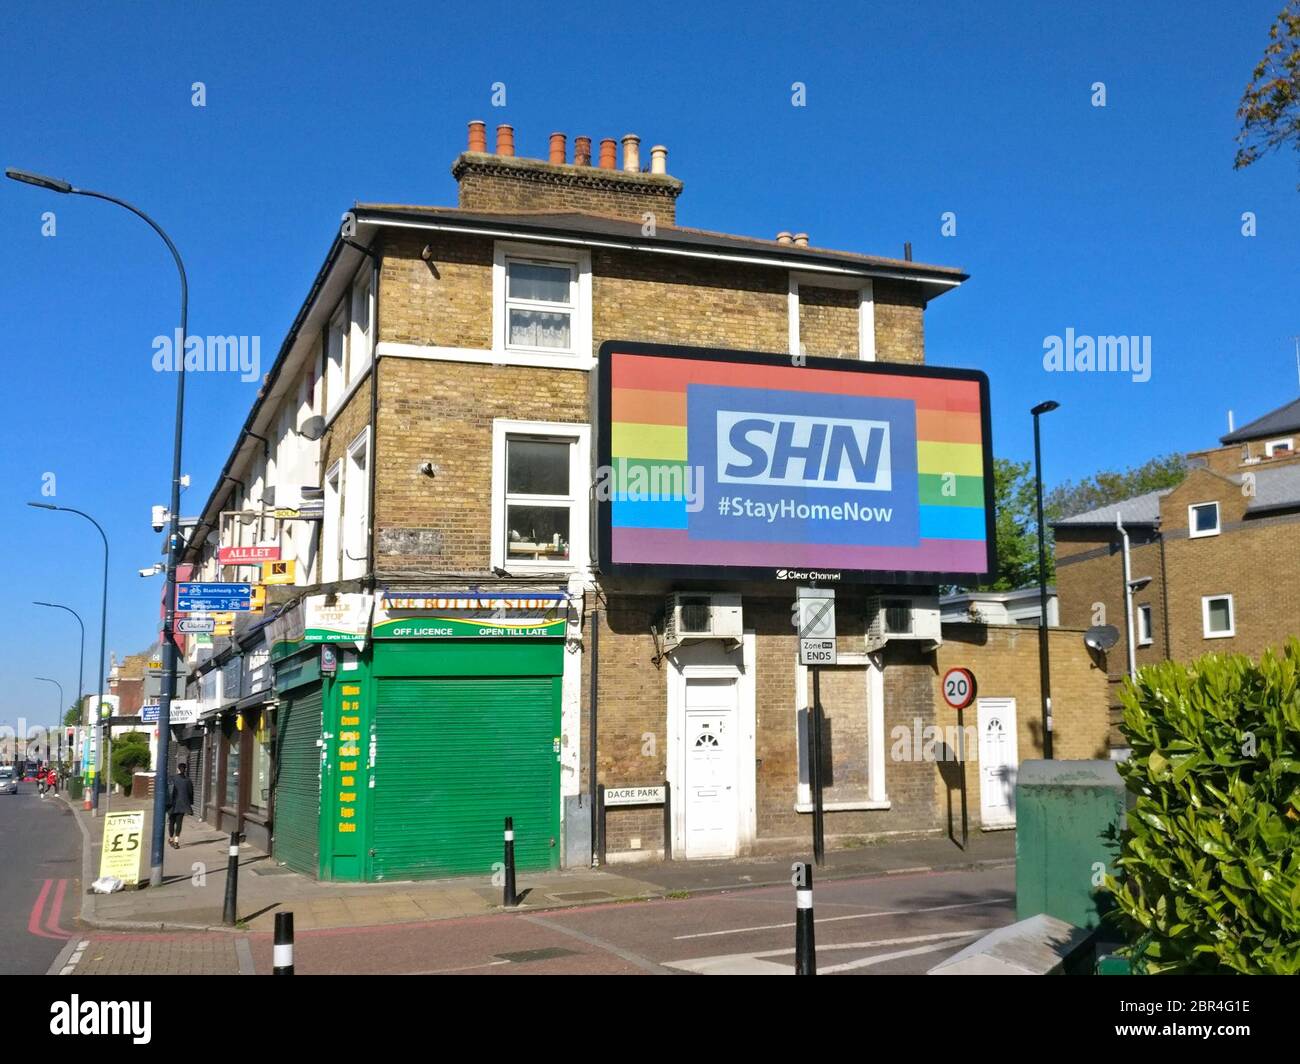 London, United Kingdom - April 20, 2020: Light Ad display with SHN (Stay Home Now, play on words NHS) with rainbow background displayed at Lewisham st Stock Photo